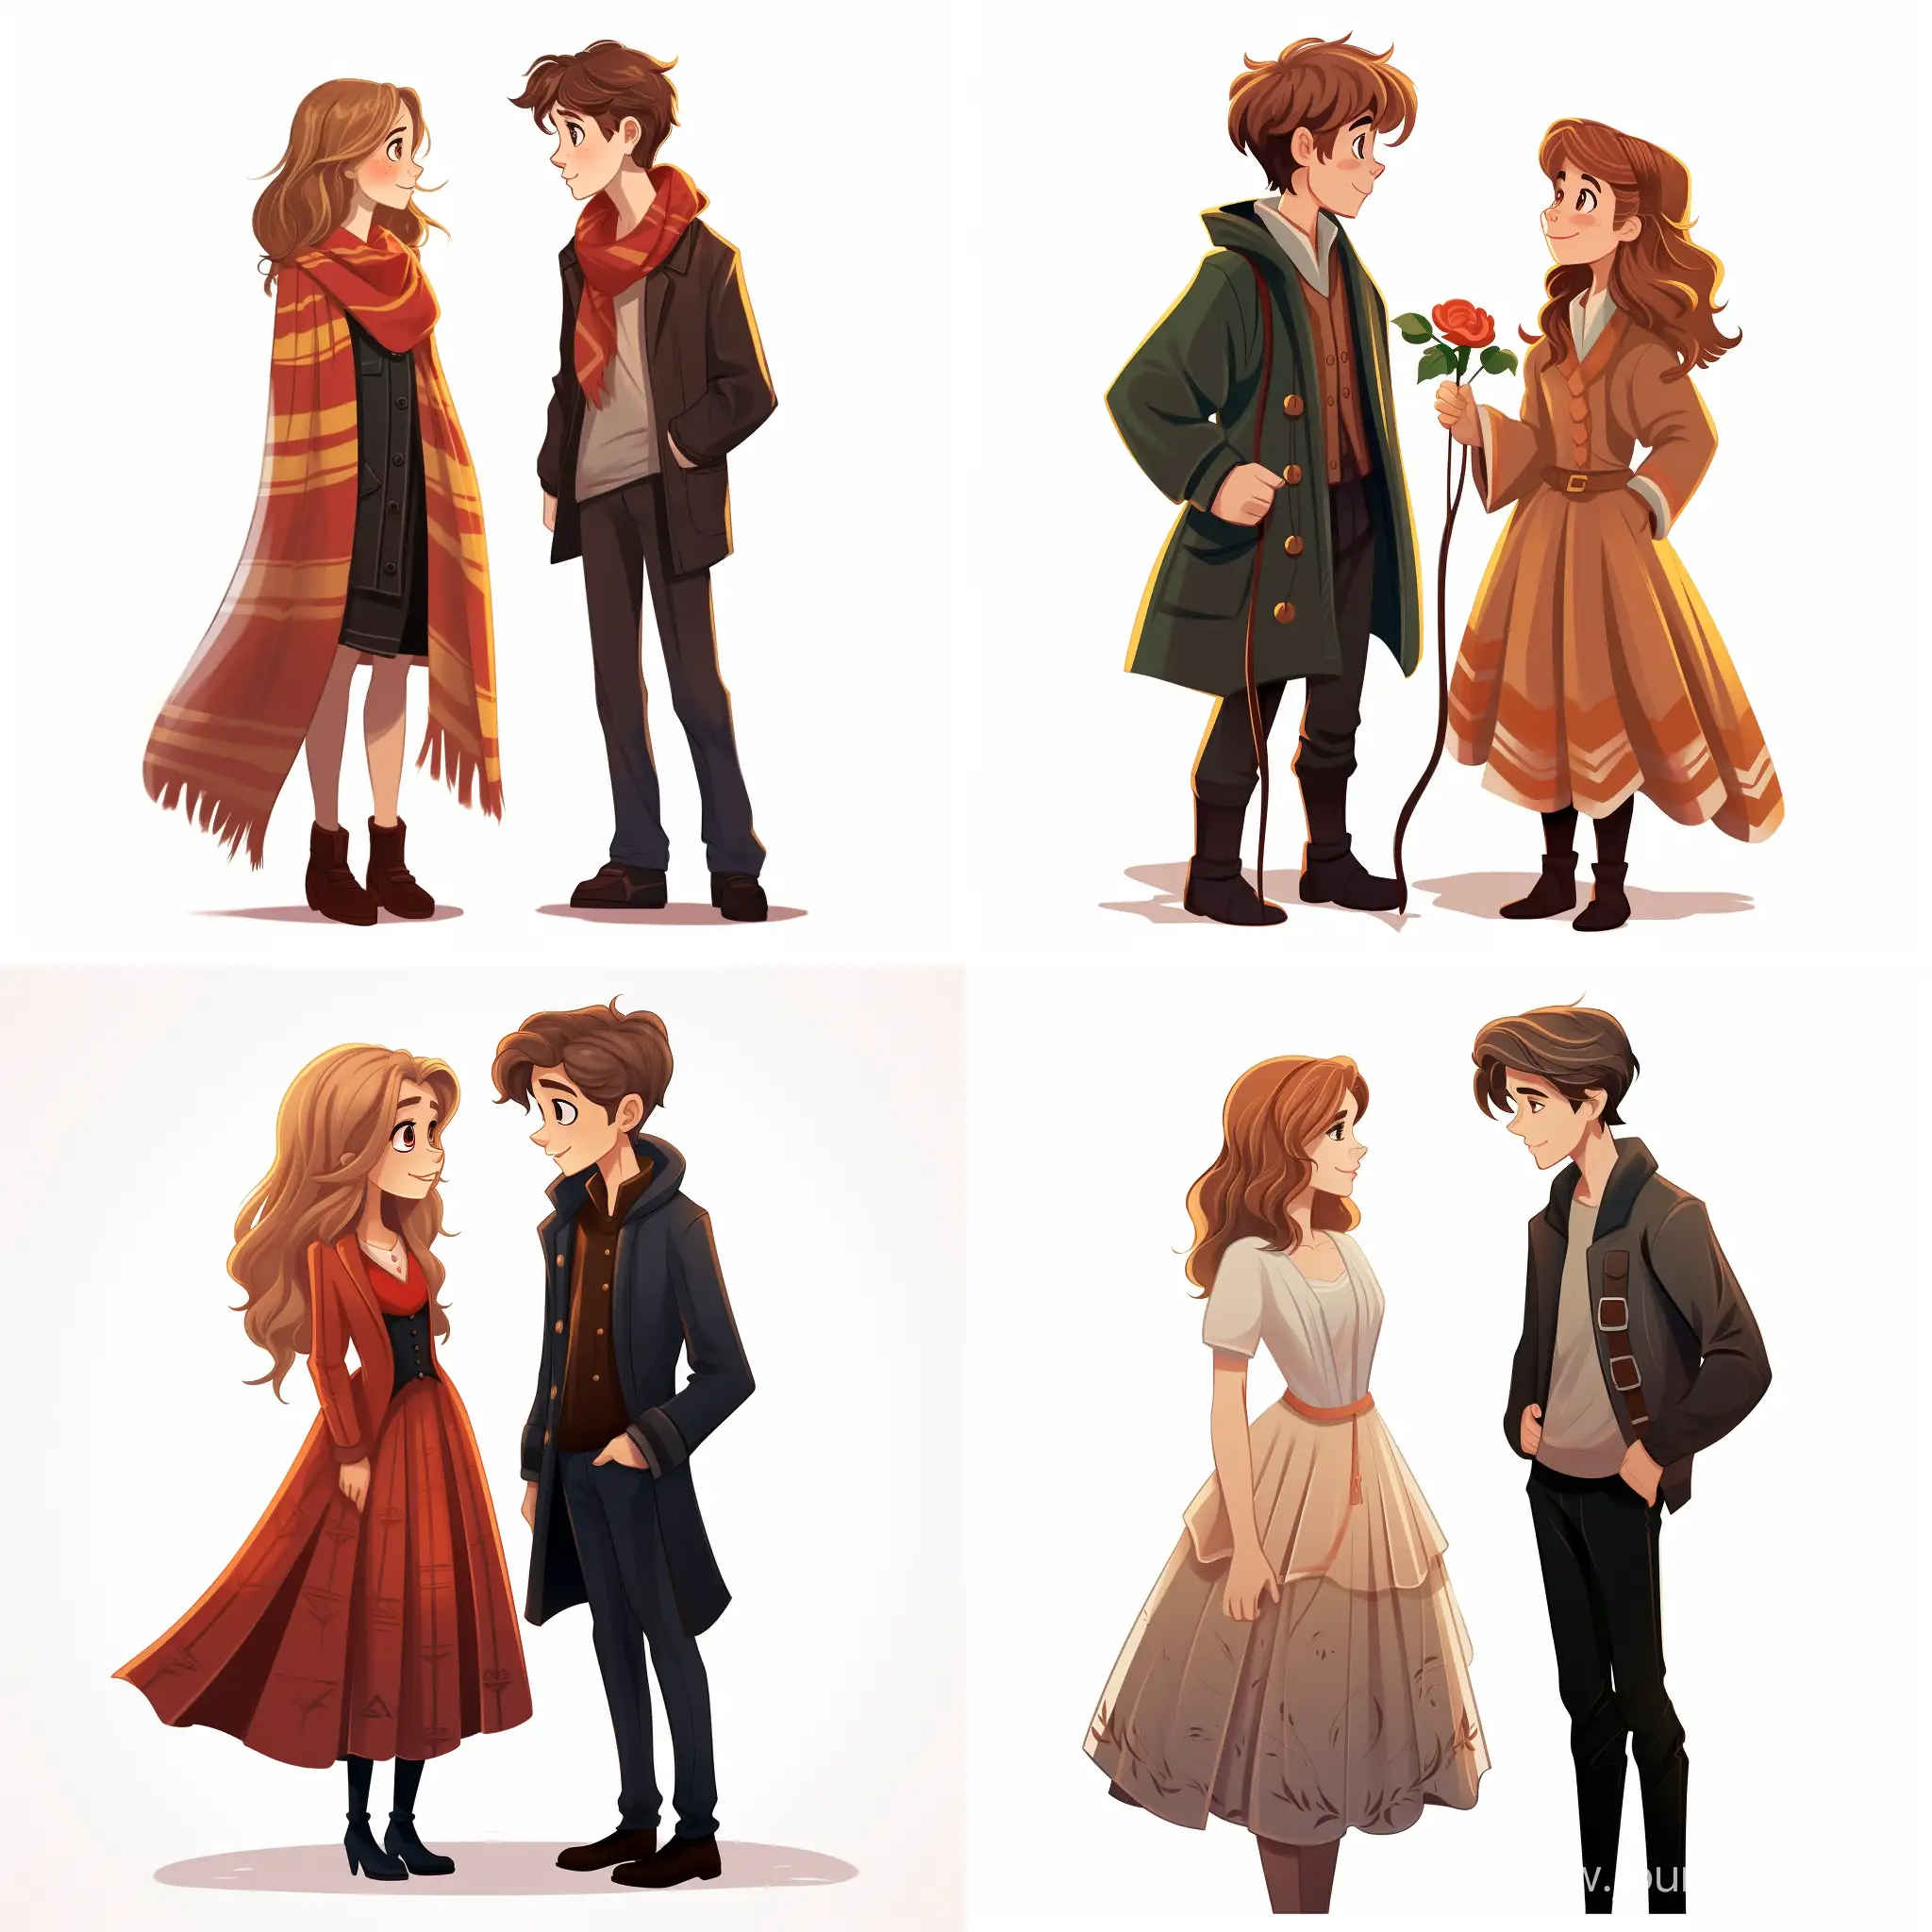 

Young Hermione, looking like Emma Watson and a young Ron Weasley, looking like Rupert Green, standing and talking on white background, cartoon style, illustration